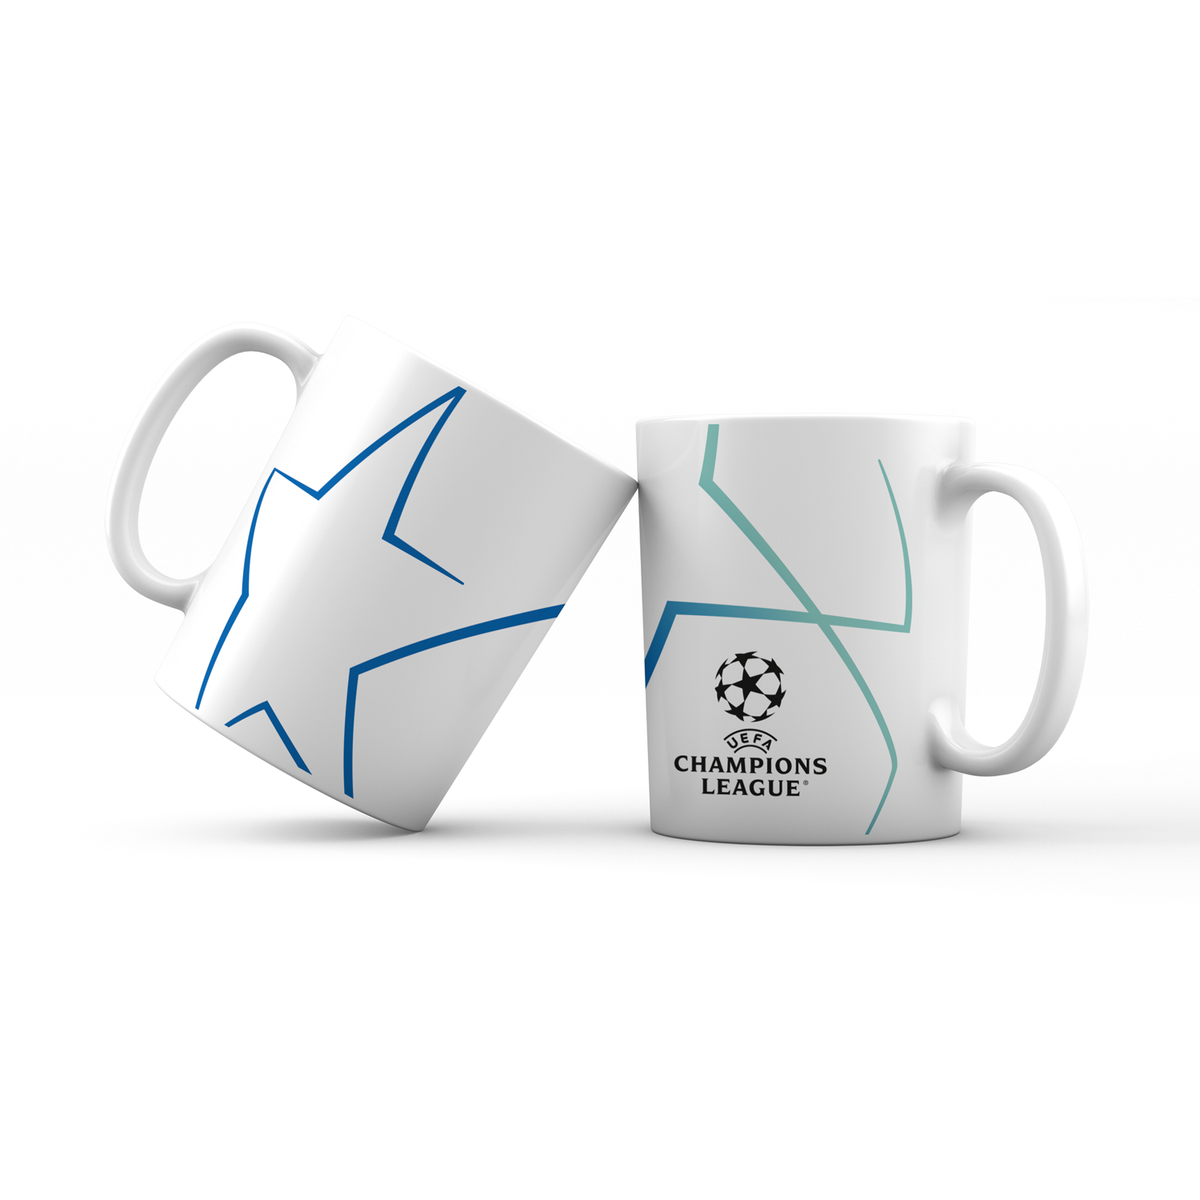 UEFA Champions League Blue/Green Starball Mug UEFA Club Competitions Online Store